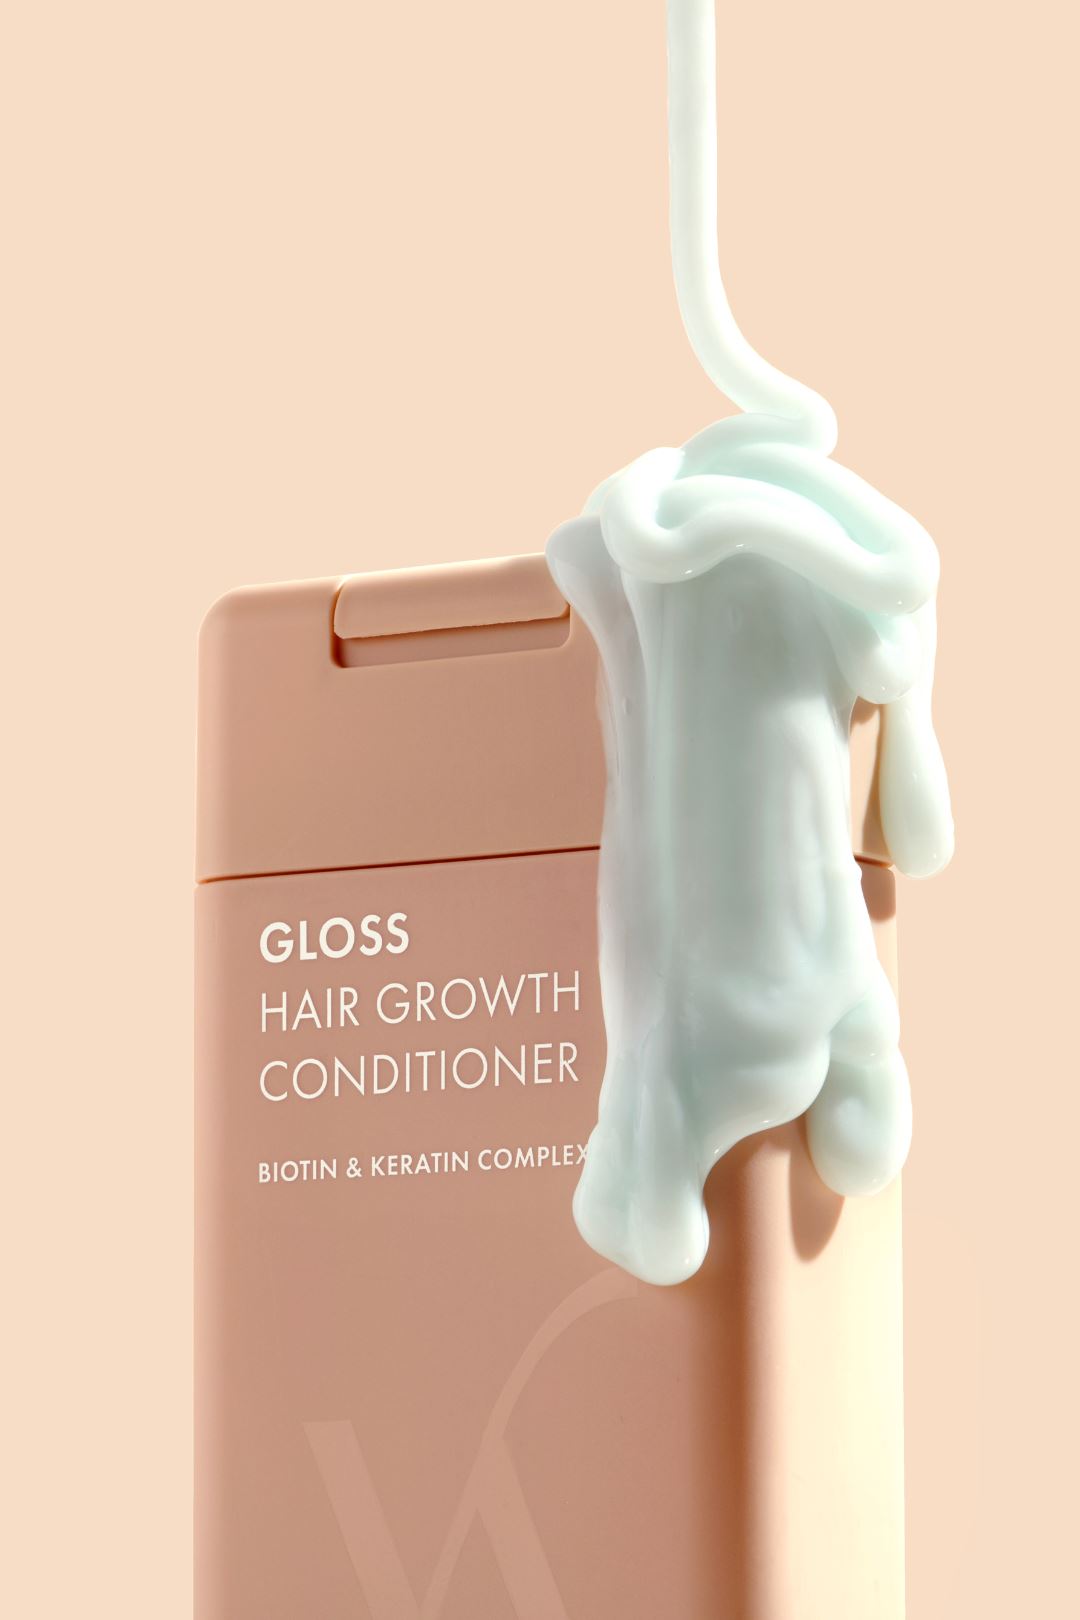 Gloss Hair Growth Conditioner